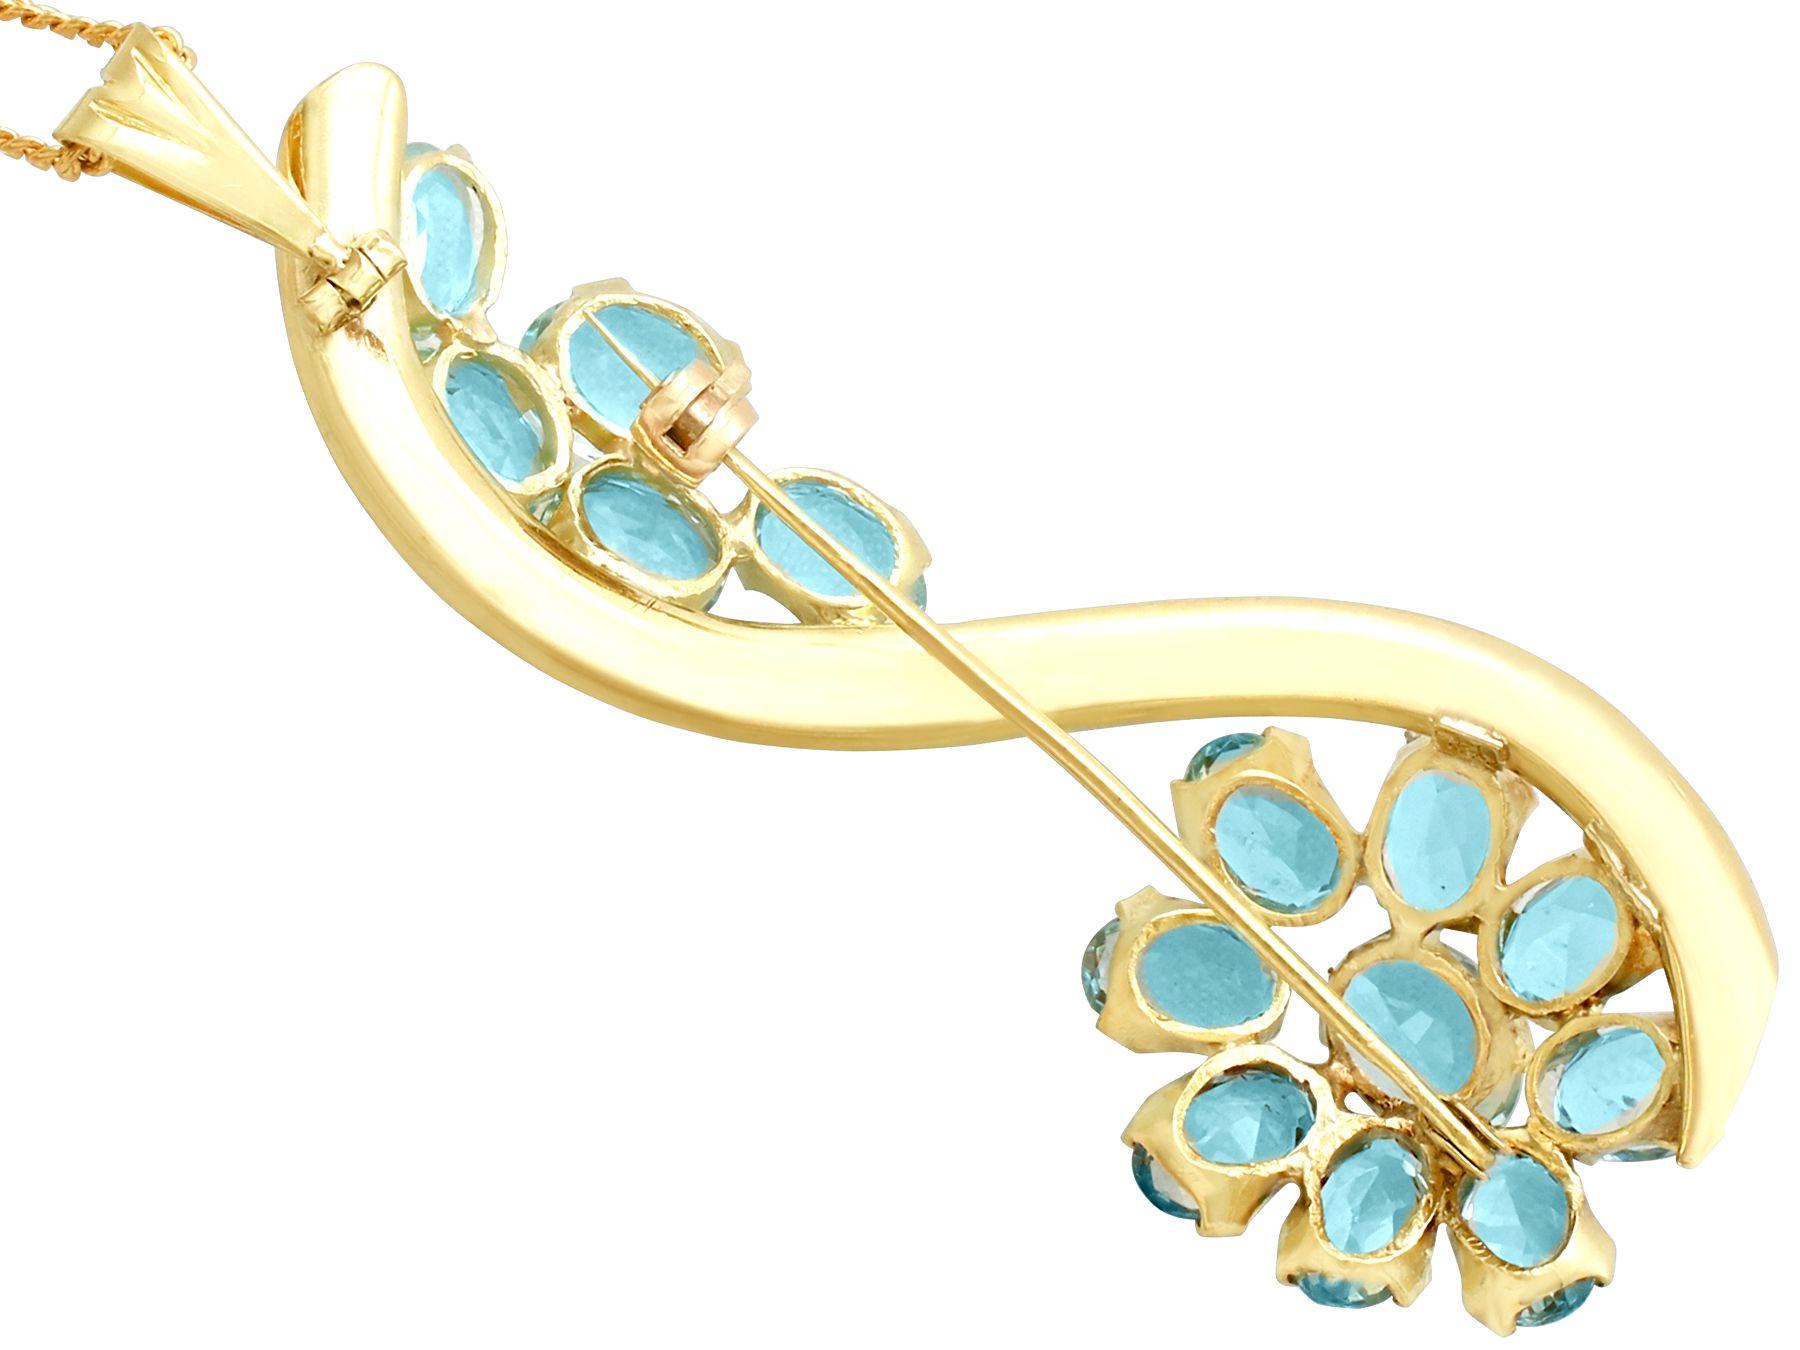 Women's or Men's Vintage 1950s 6.05 Carat Aquamarine and Yellow Gold Pendant / Brooch For Sale